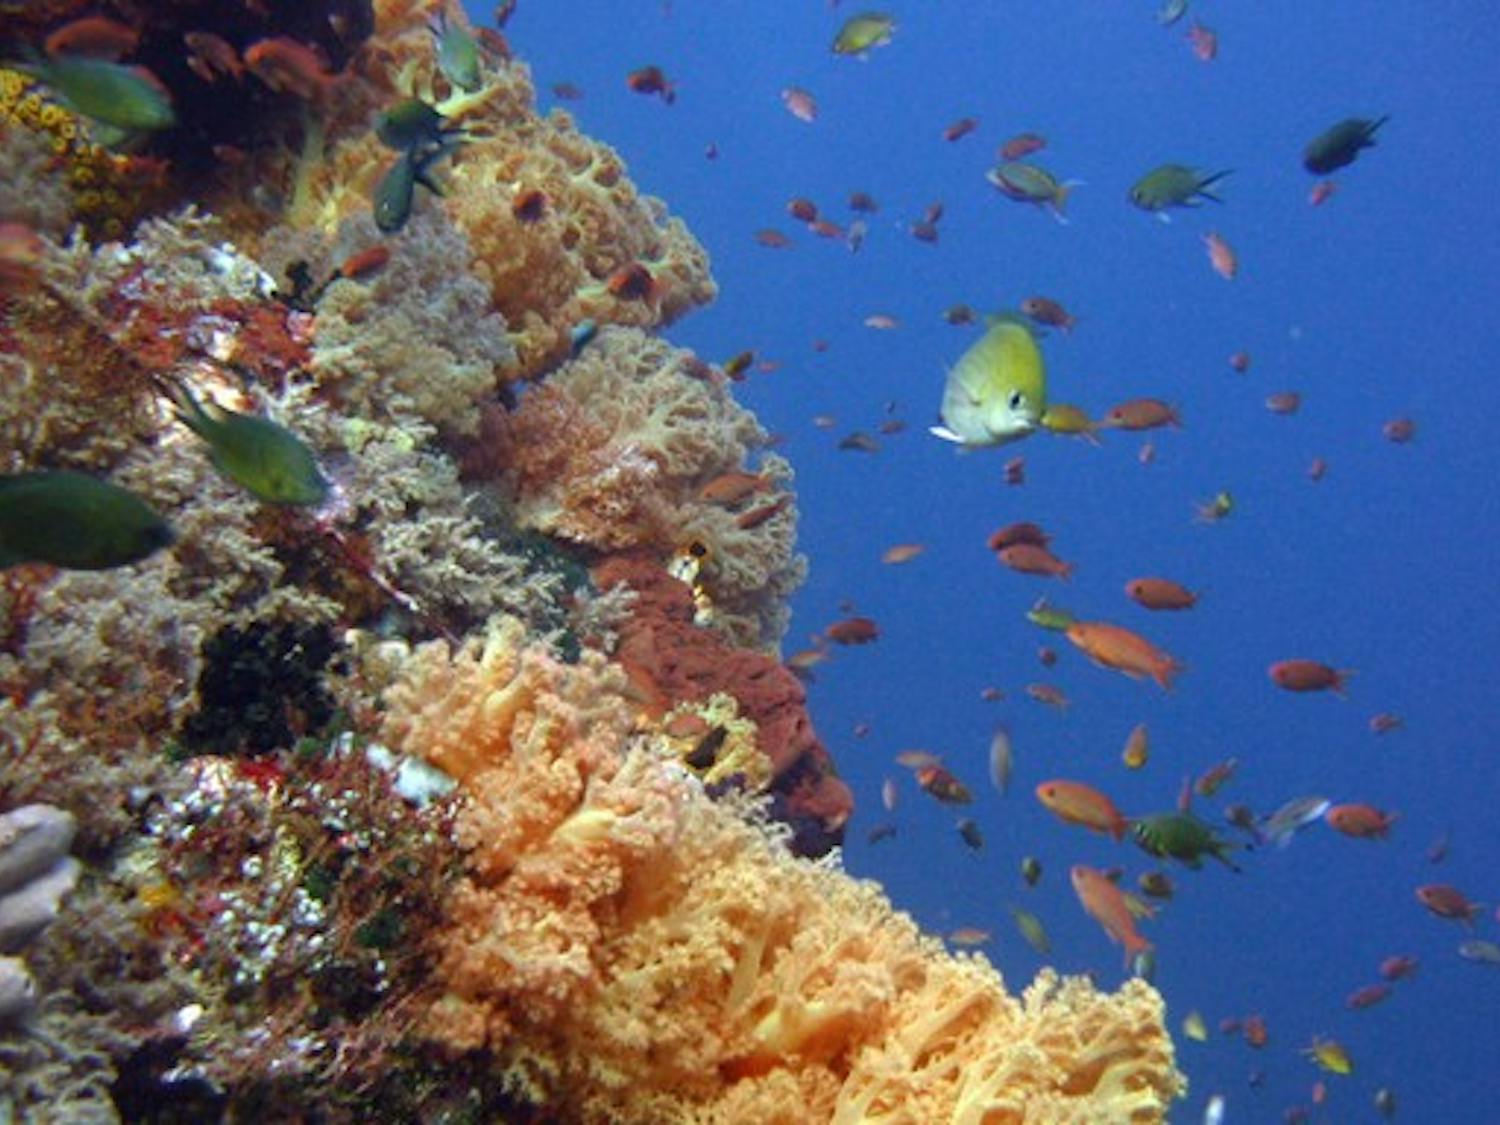 Photograph of fish swimming through a coral reef